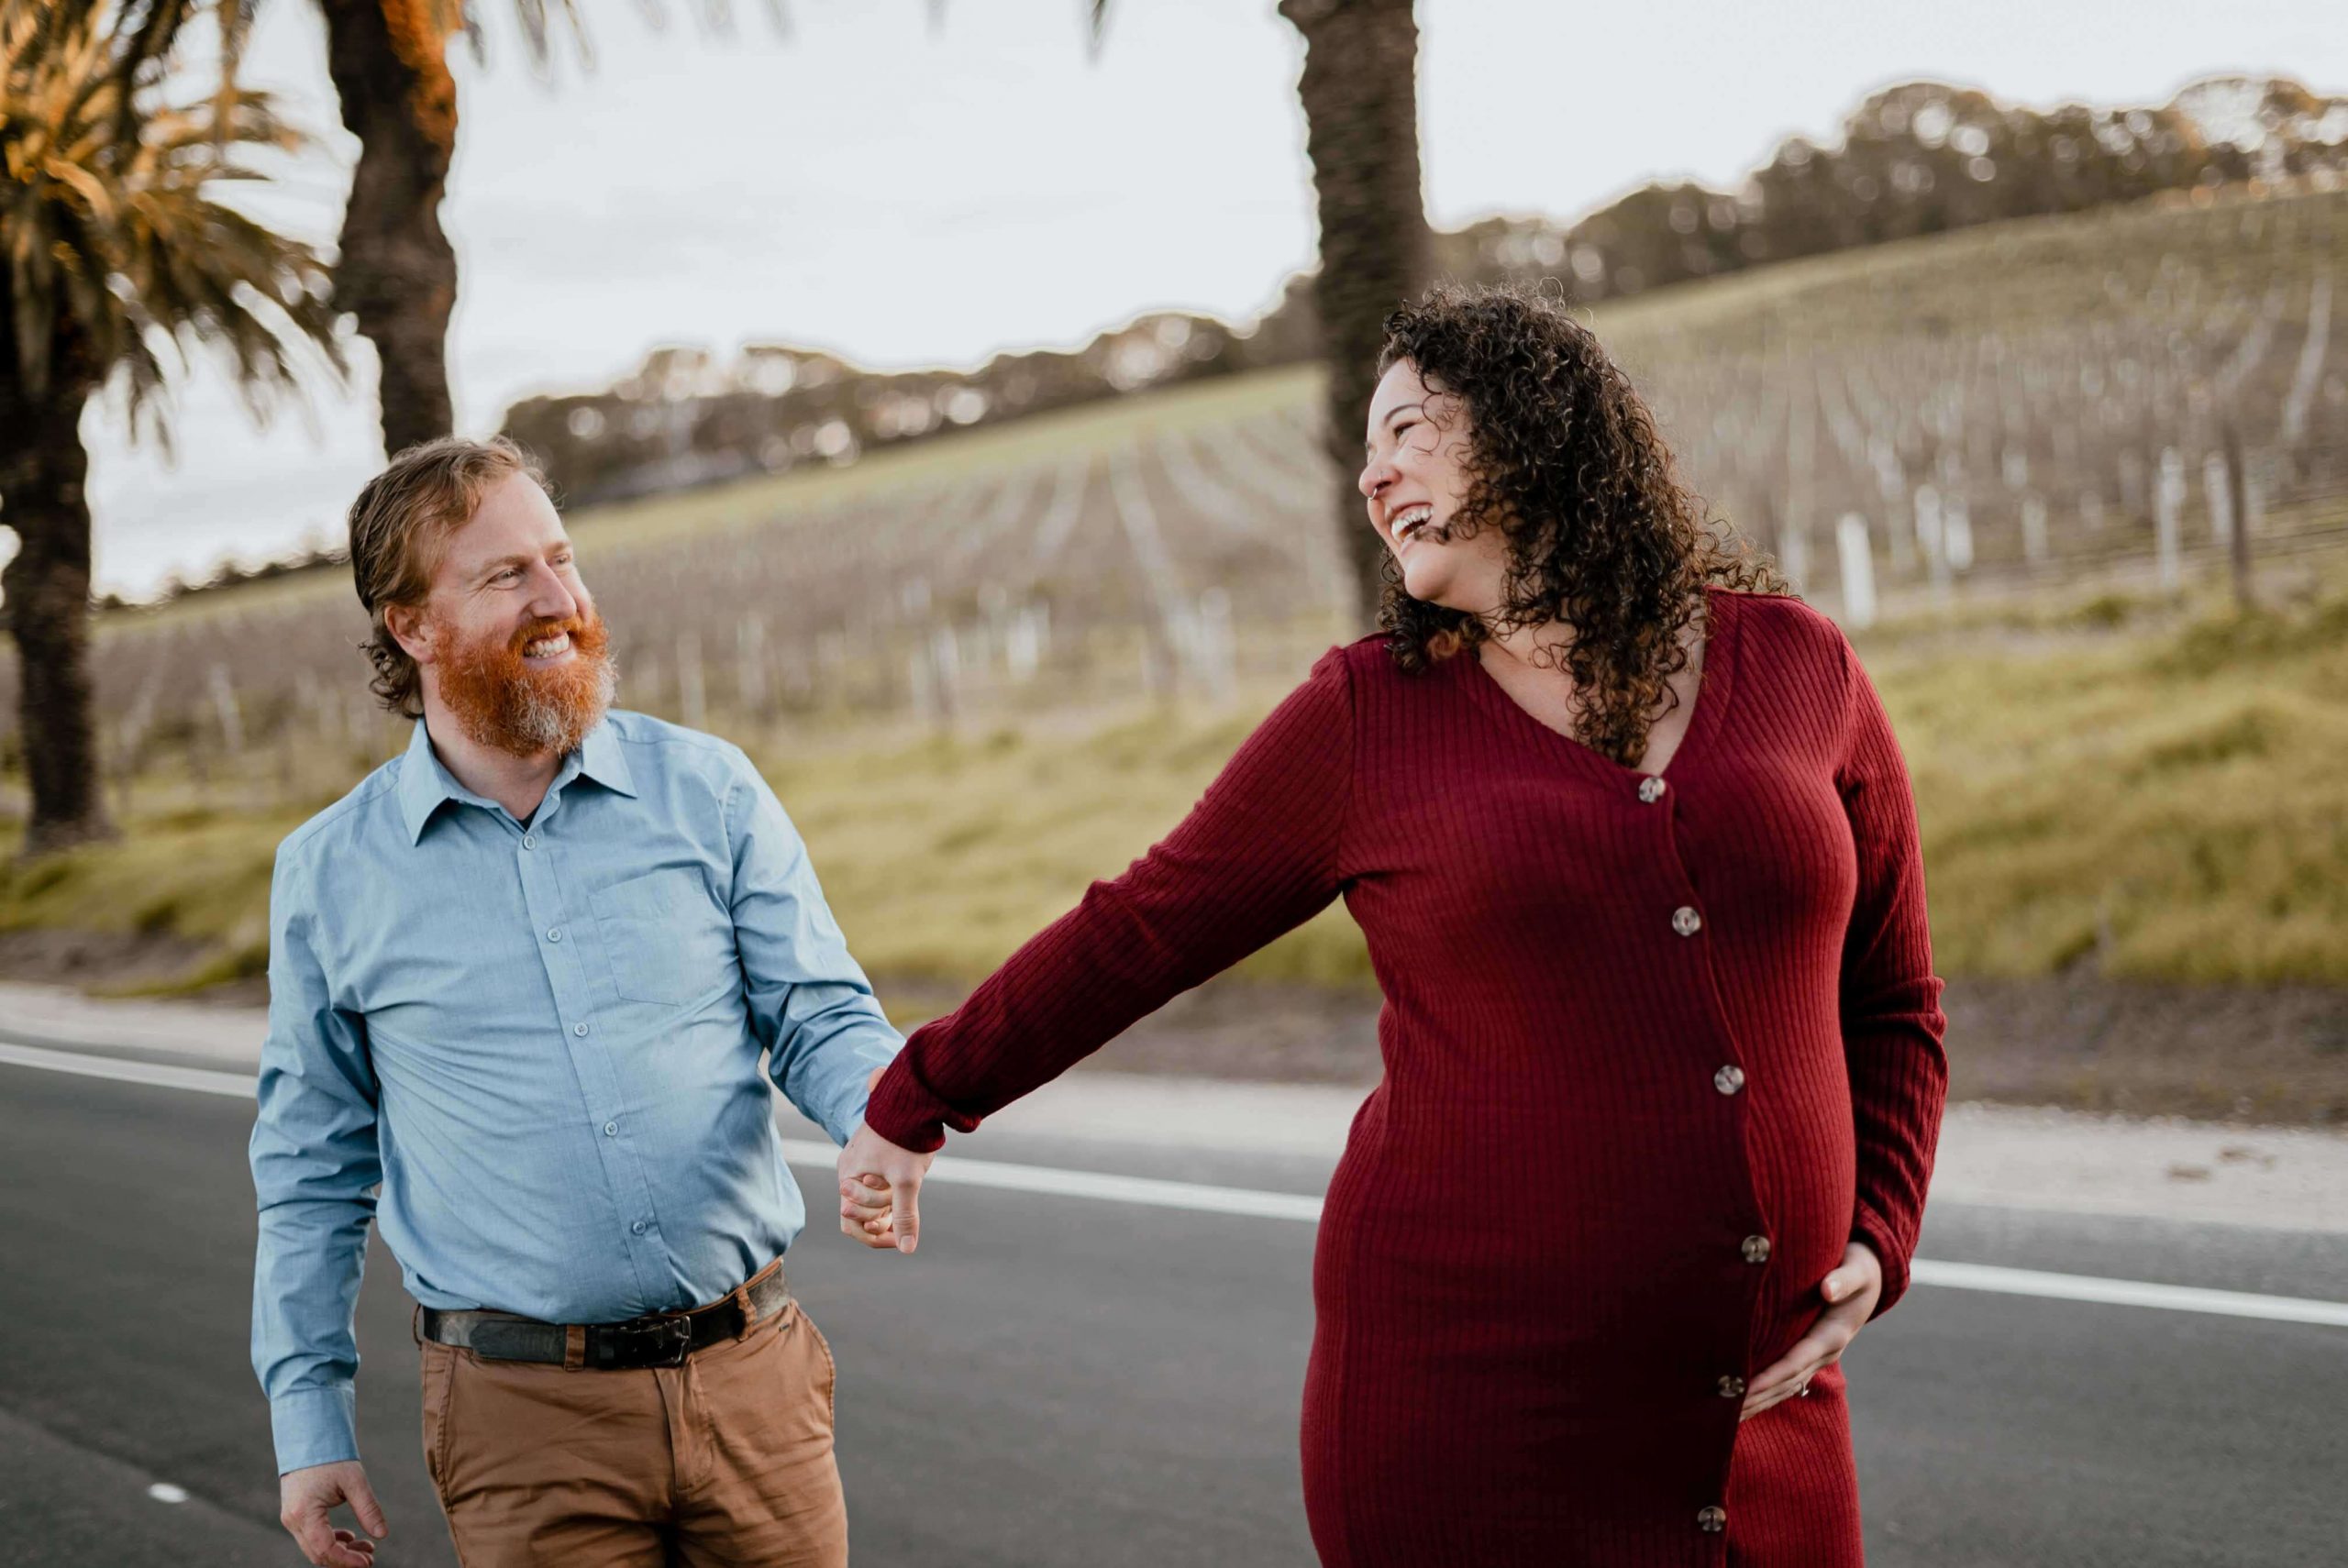 maternity films and photos: pregnant women walking holding hands with her husband and leading the way